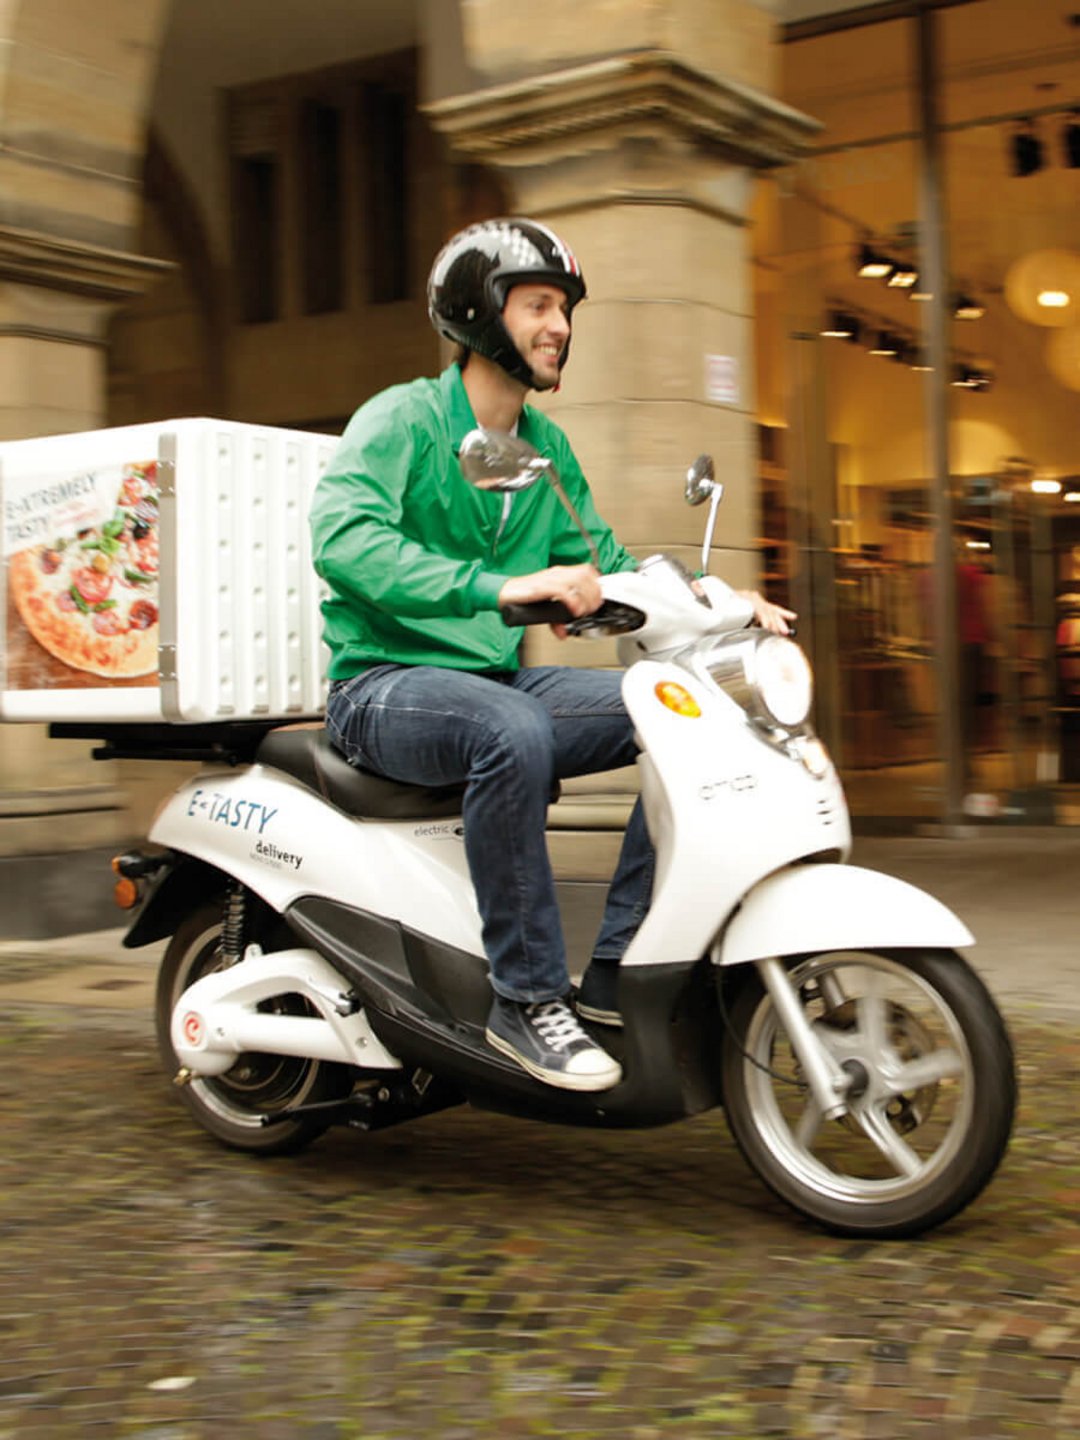 Environmentally friendly pizza scooters from emco.